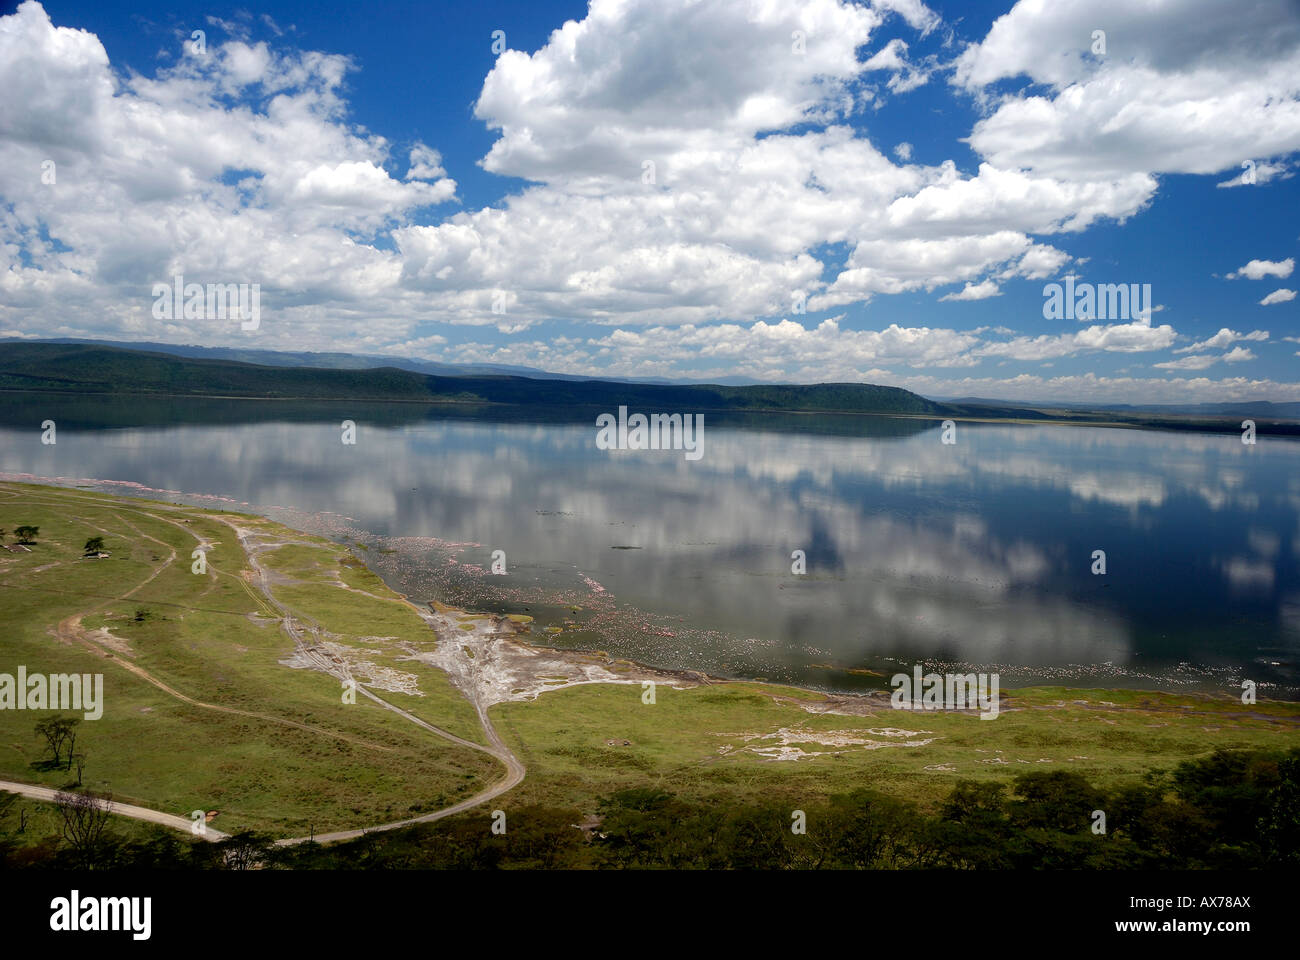 Lake Nakuru reflecting the clouds in the water with flamingoes and water buffalo along the shoreline Stock Photo